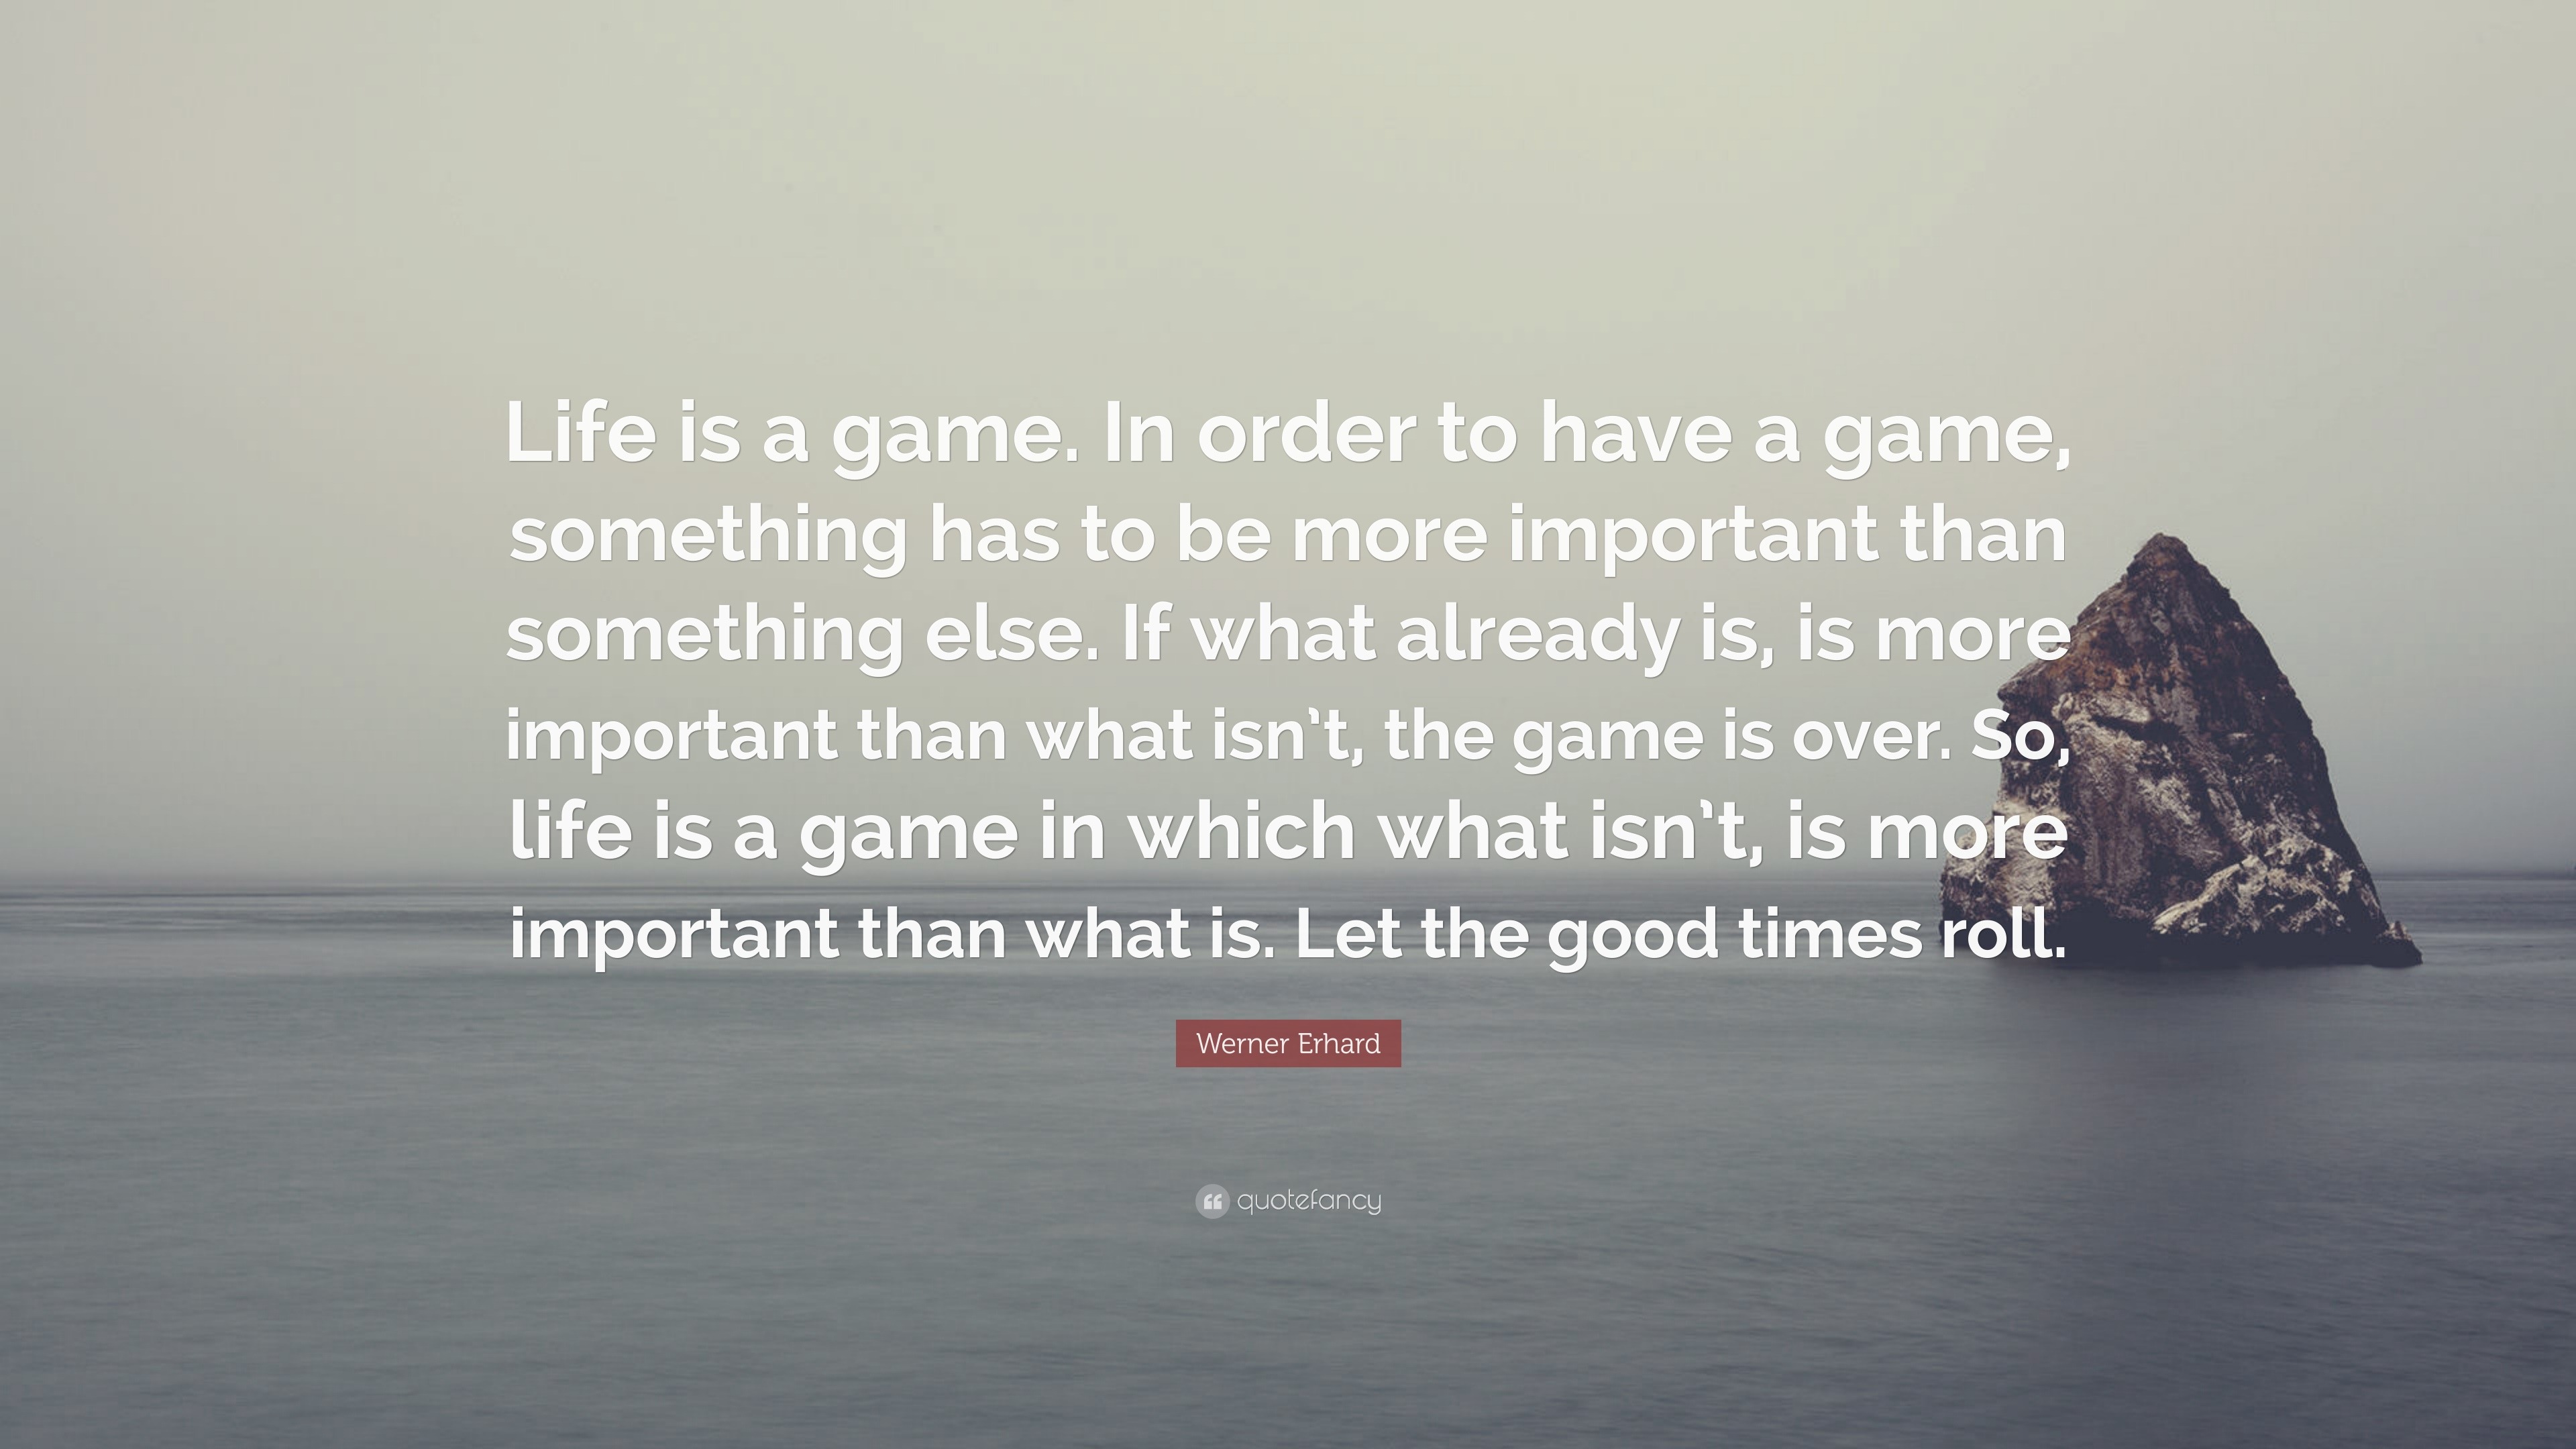 Life Is Short Quotes “Life is a game In order to have a